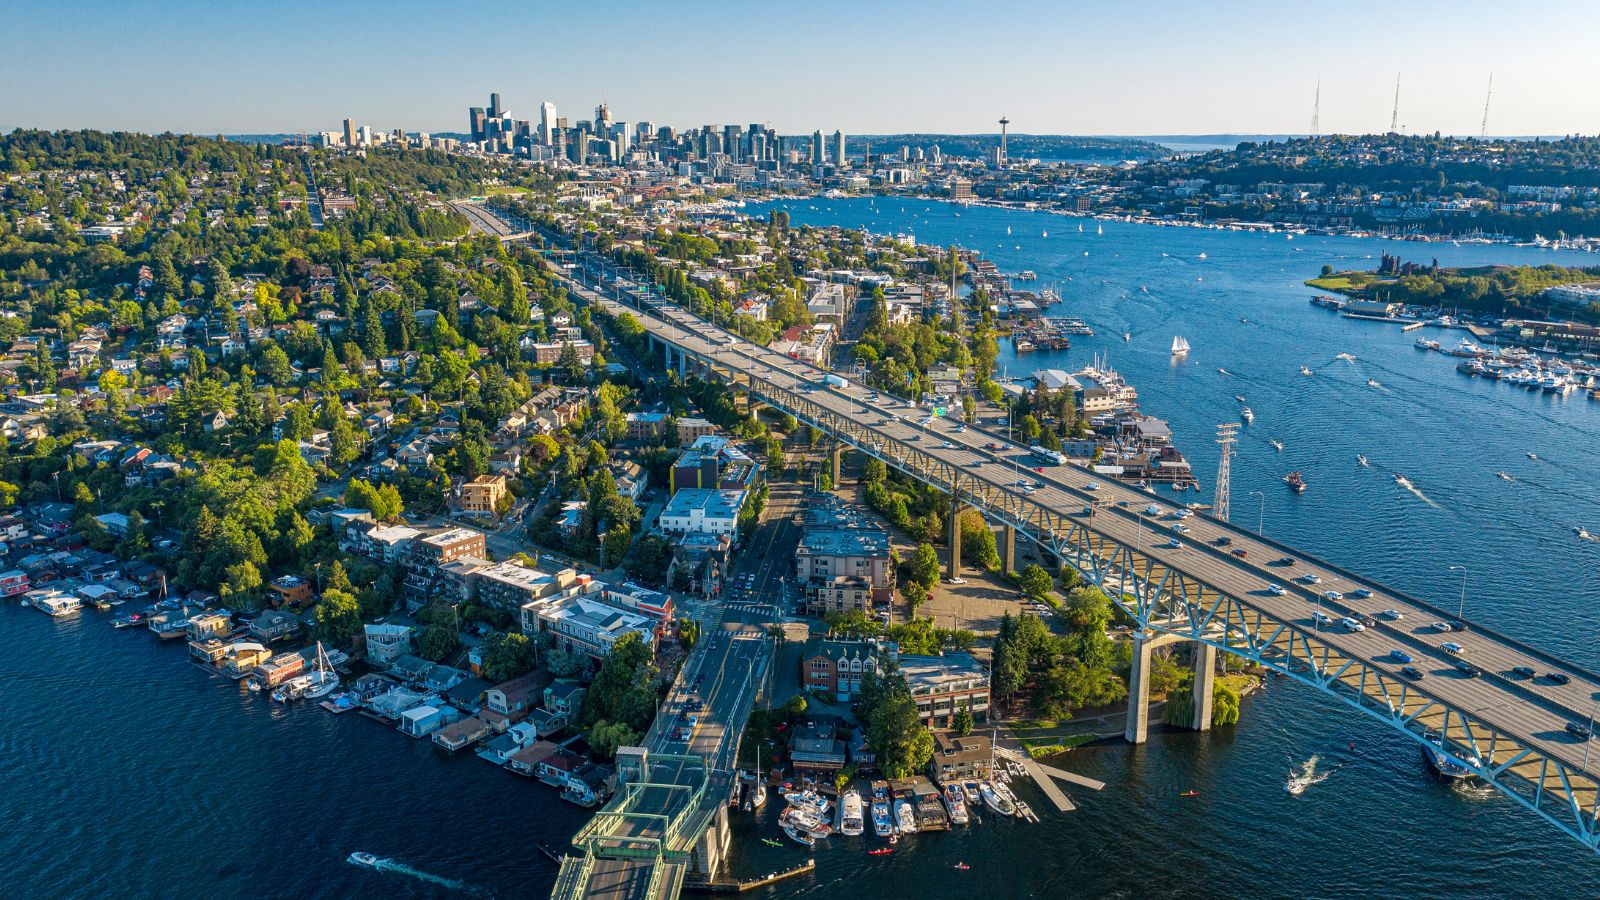 <p>Seattle has seen rent jump 13% compared to pre-pandemic levels. The city’s thriving tech sector and limited housing stock drive up costs and force many renters to move to cheaper areas. Suburban rent around Seattle has risen 15–21% during the pandemic, shrinking the affordability gap between the city and suburbs.</p>